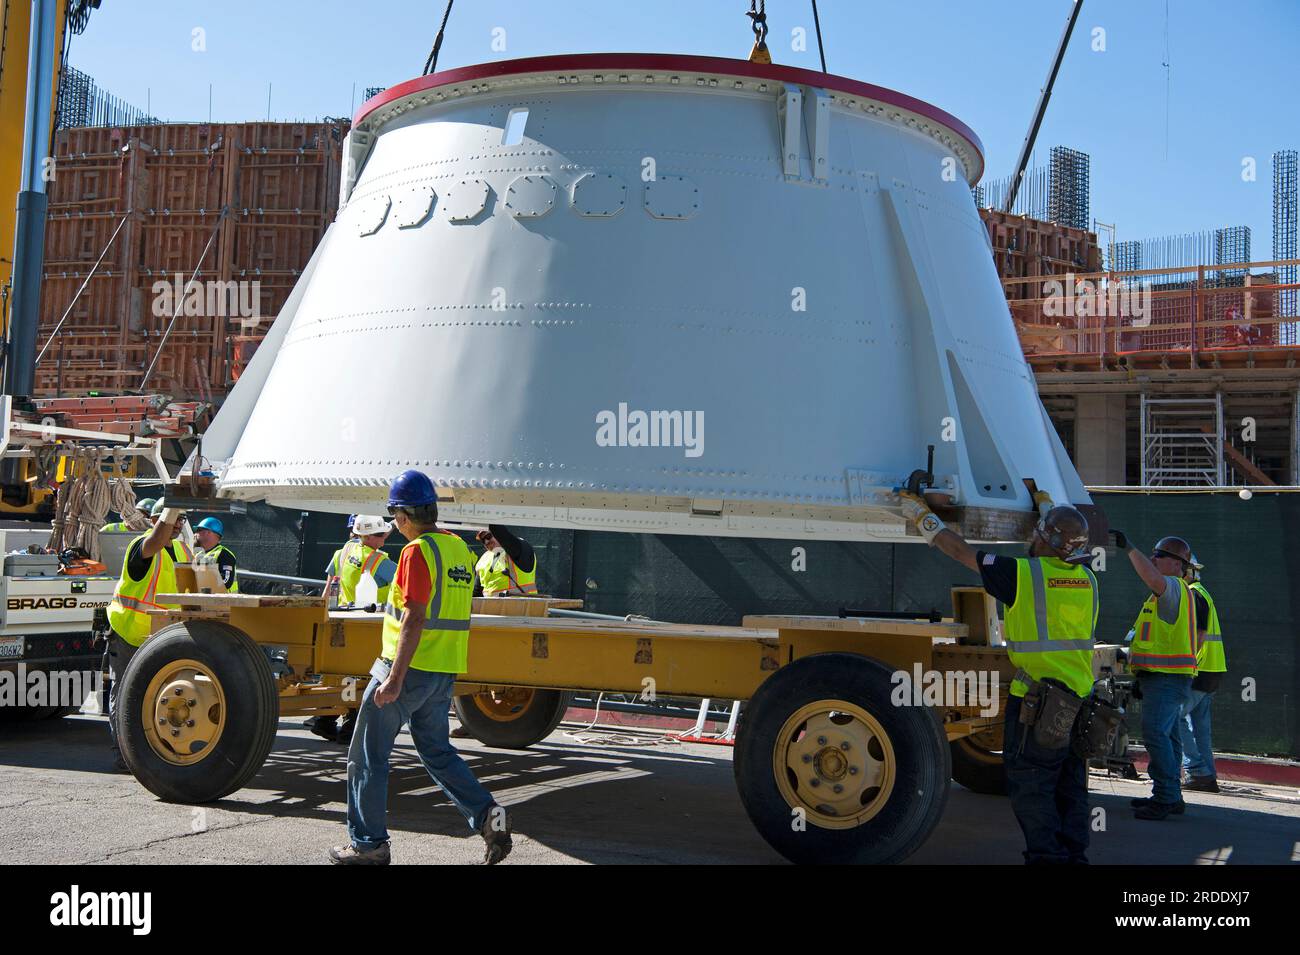 Workmen transporting one of the aft skirts of the Endeavor Space Shuttle into position for installation at the California Science Center, L.A., CA. Stock Photo